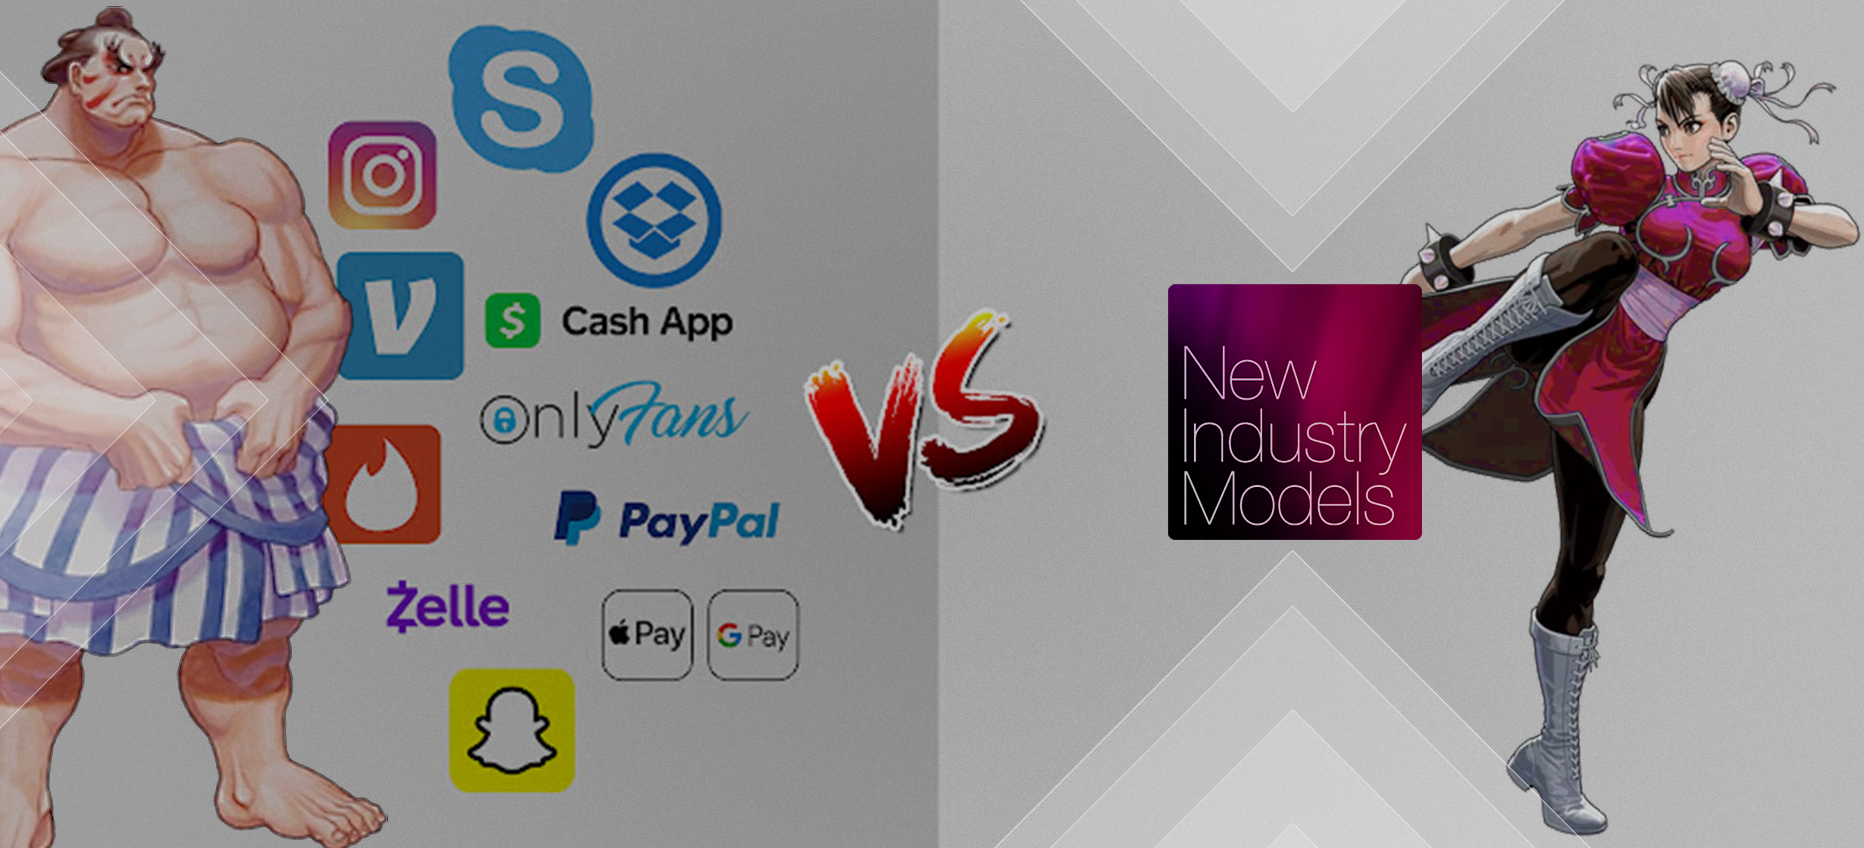 Not making money with Premium Snapchat, Skype, and Onlyfans? The New Industry Models Guide